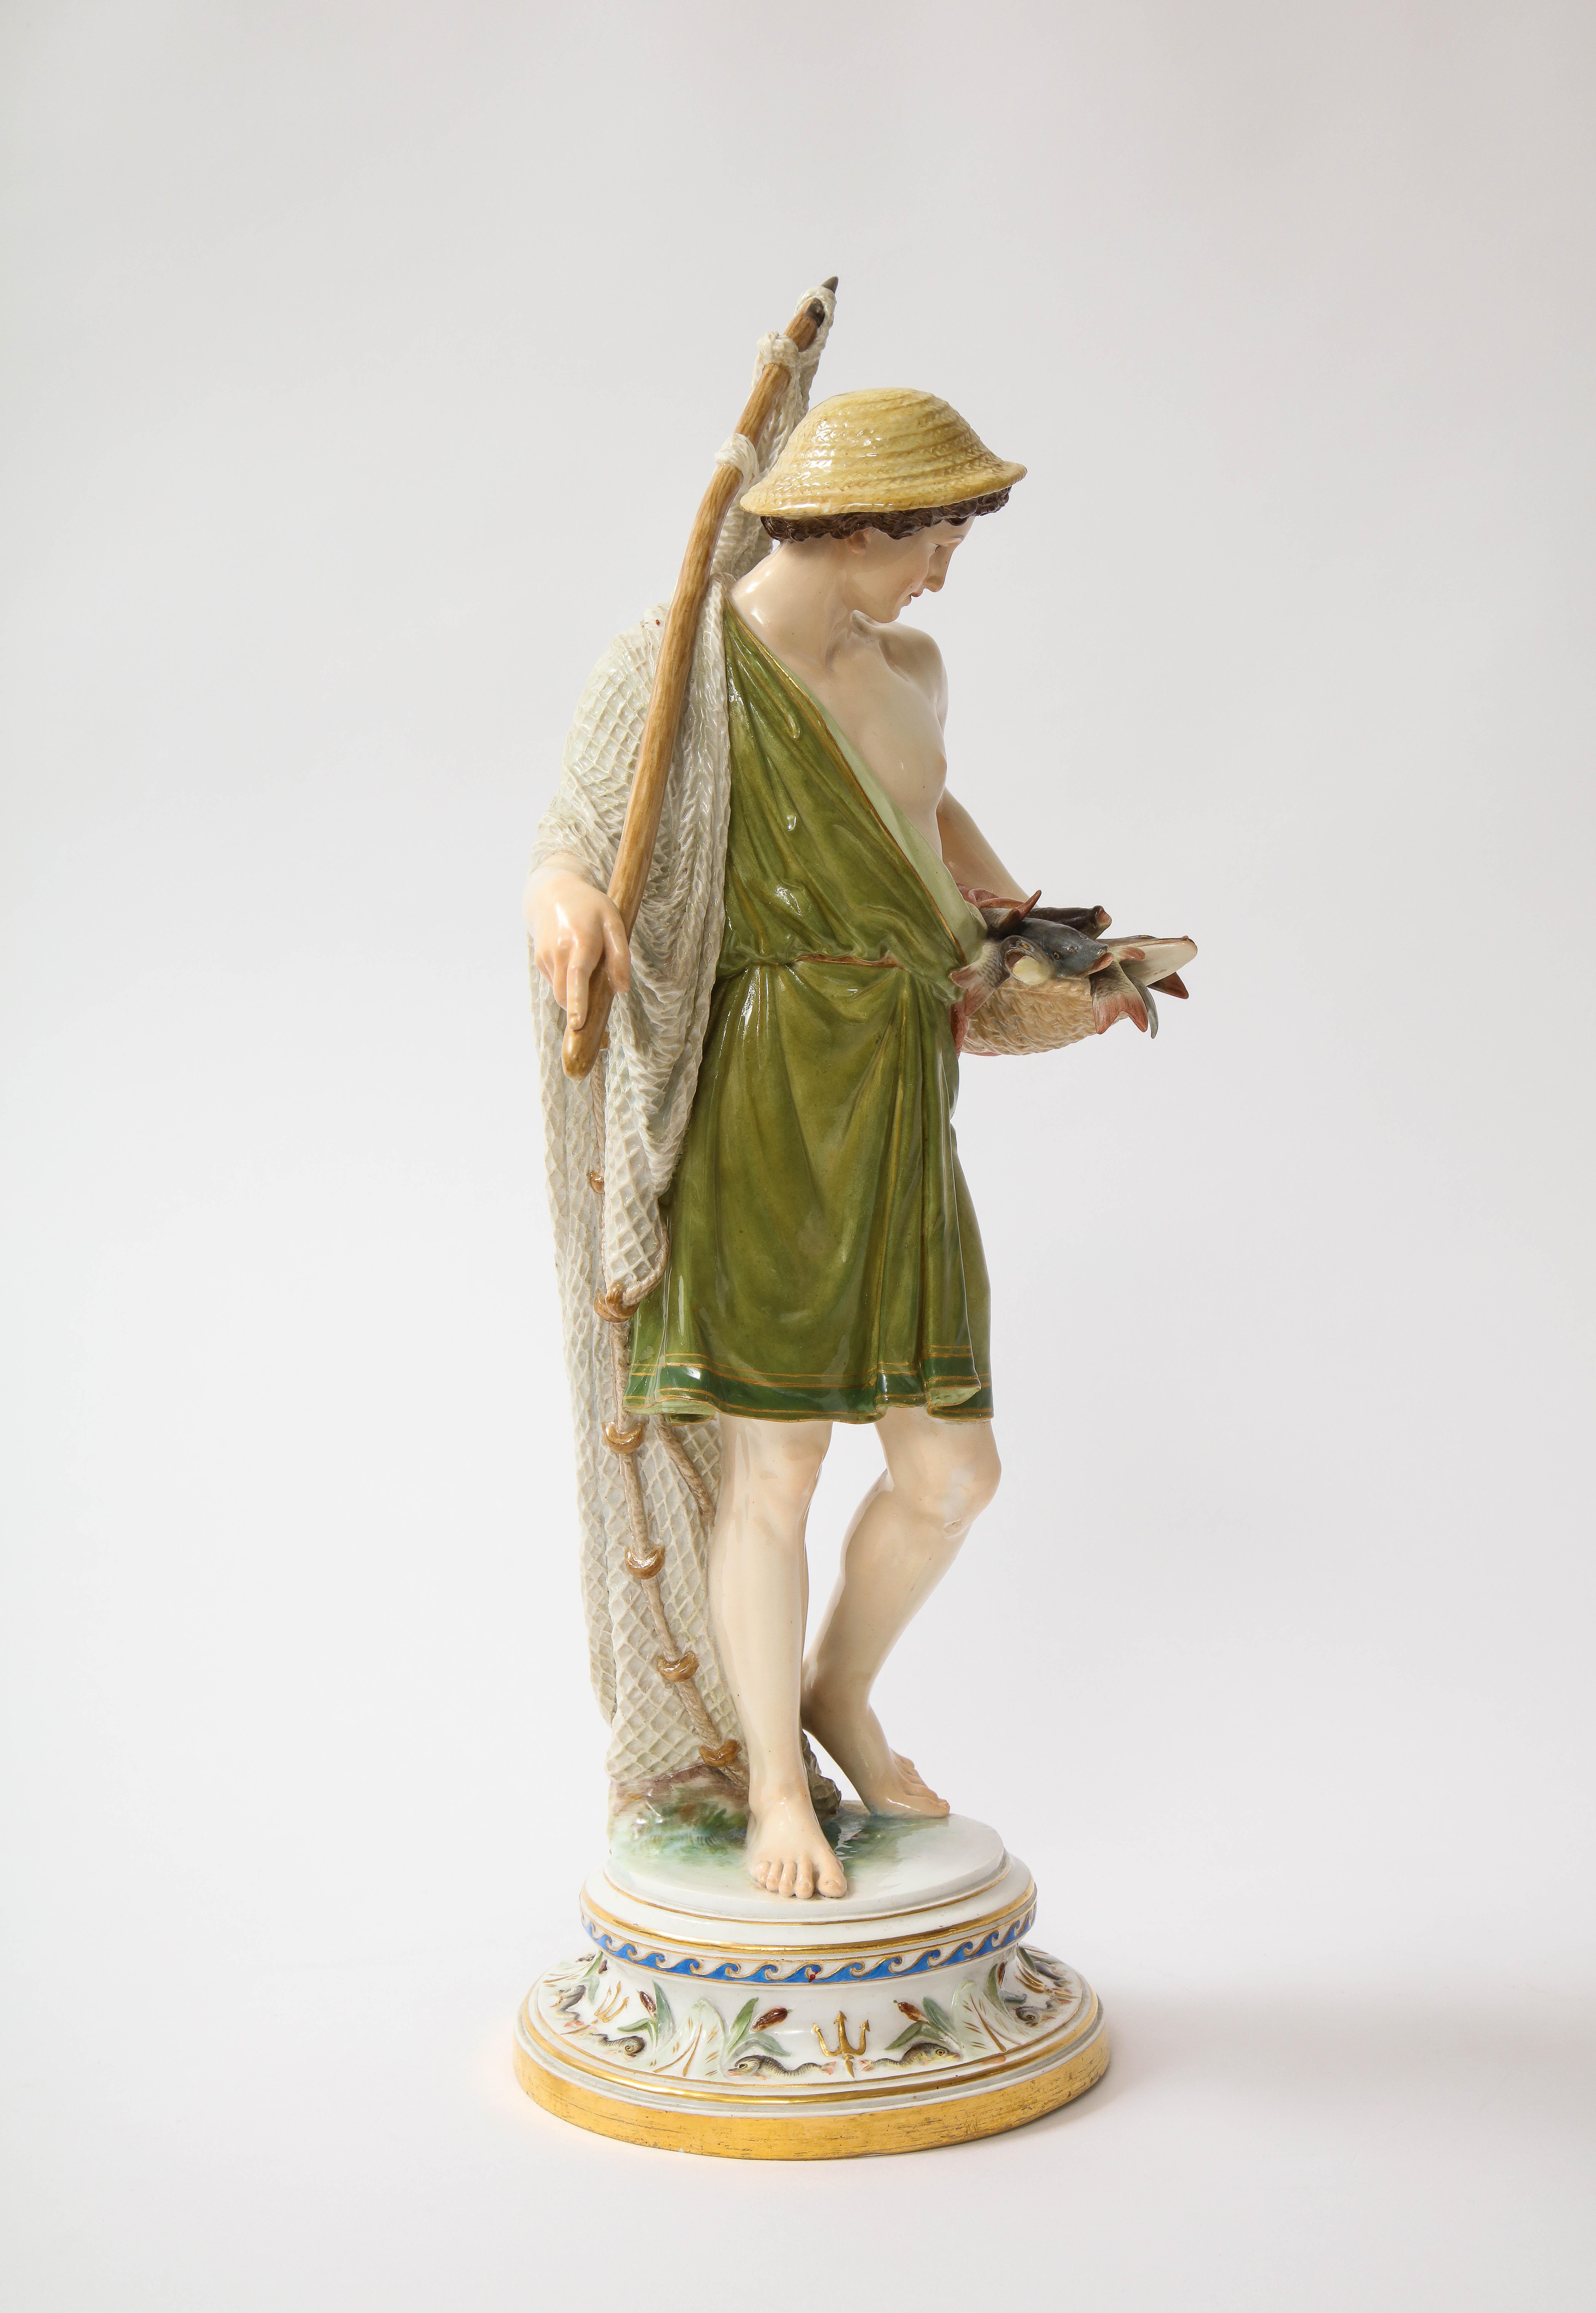 A Large 19th C. Meissen Porcelain Figure of a Fisherman with a Net.  As one's gaze ascends, attention is drawn to the fisherman's head, crowned by a wonderfully crafted utilitarian straw hat. Beneath its brim, lustrous rich brown curls cascade,